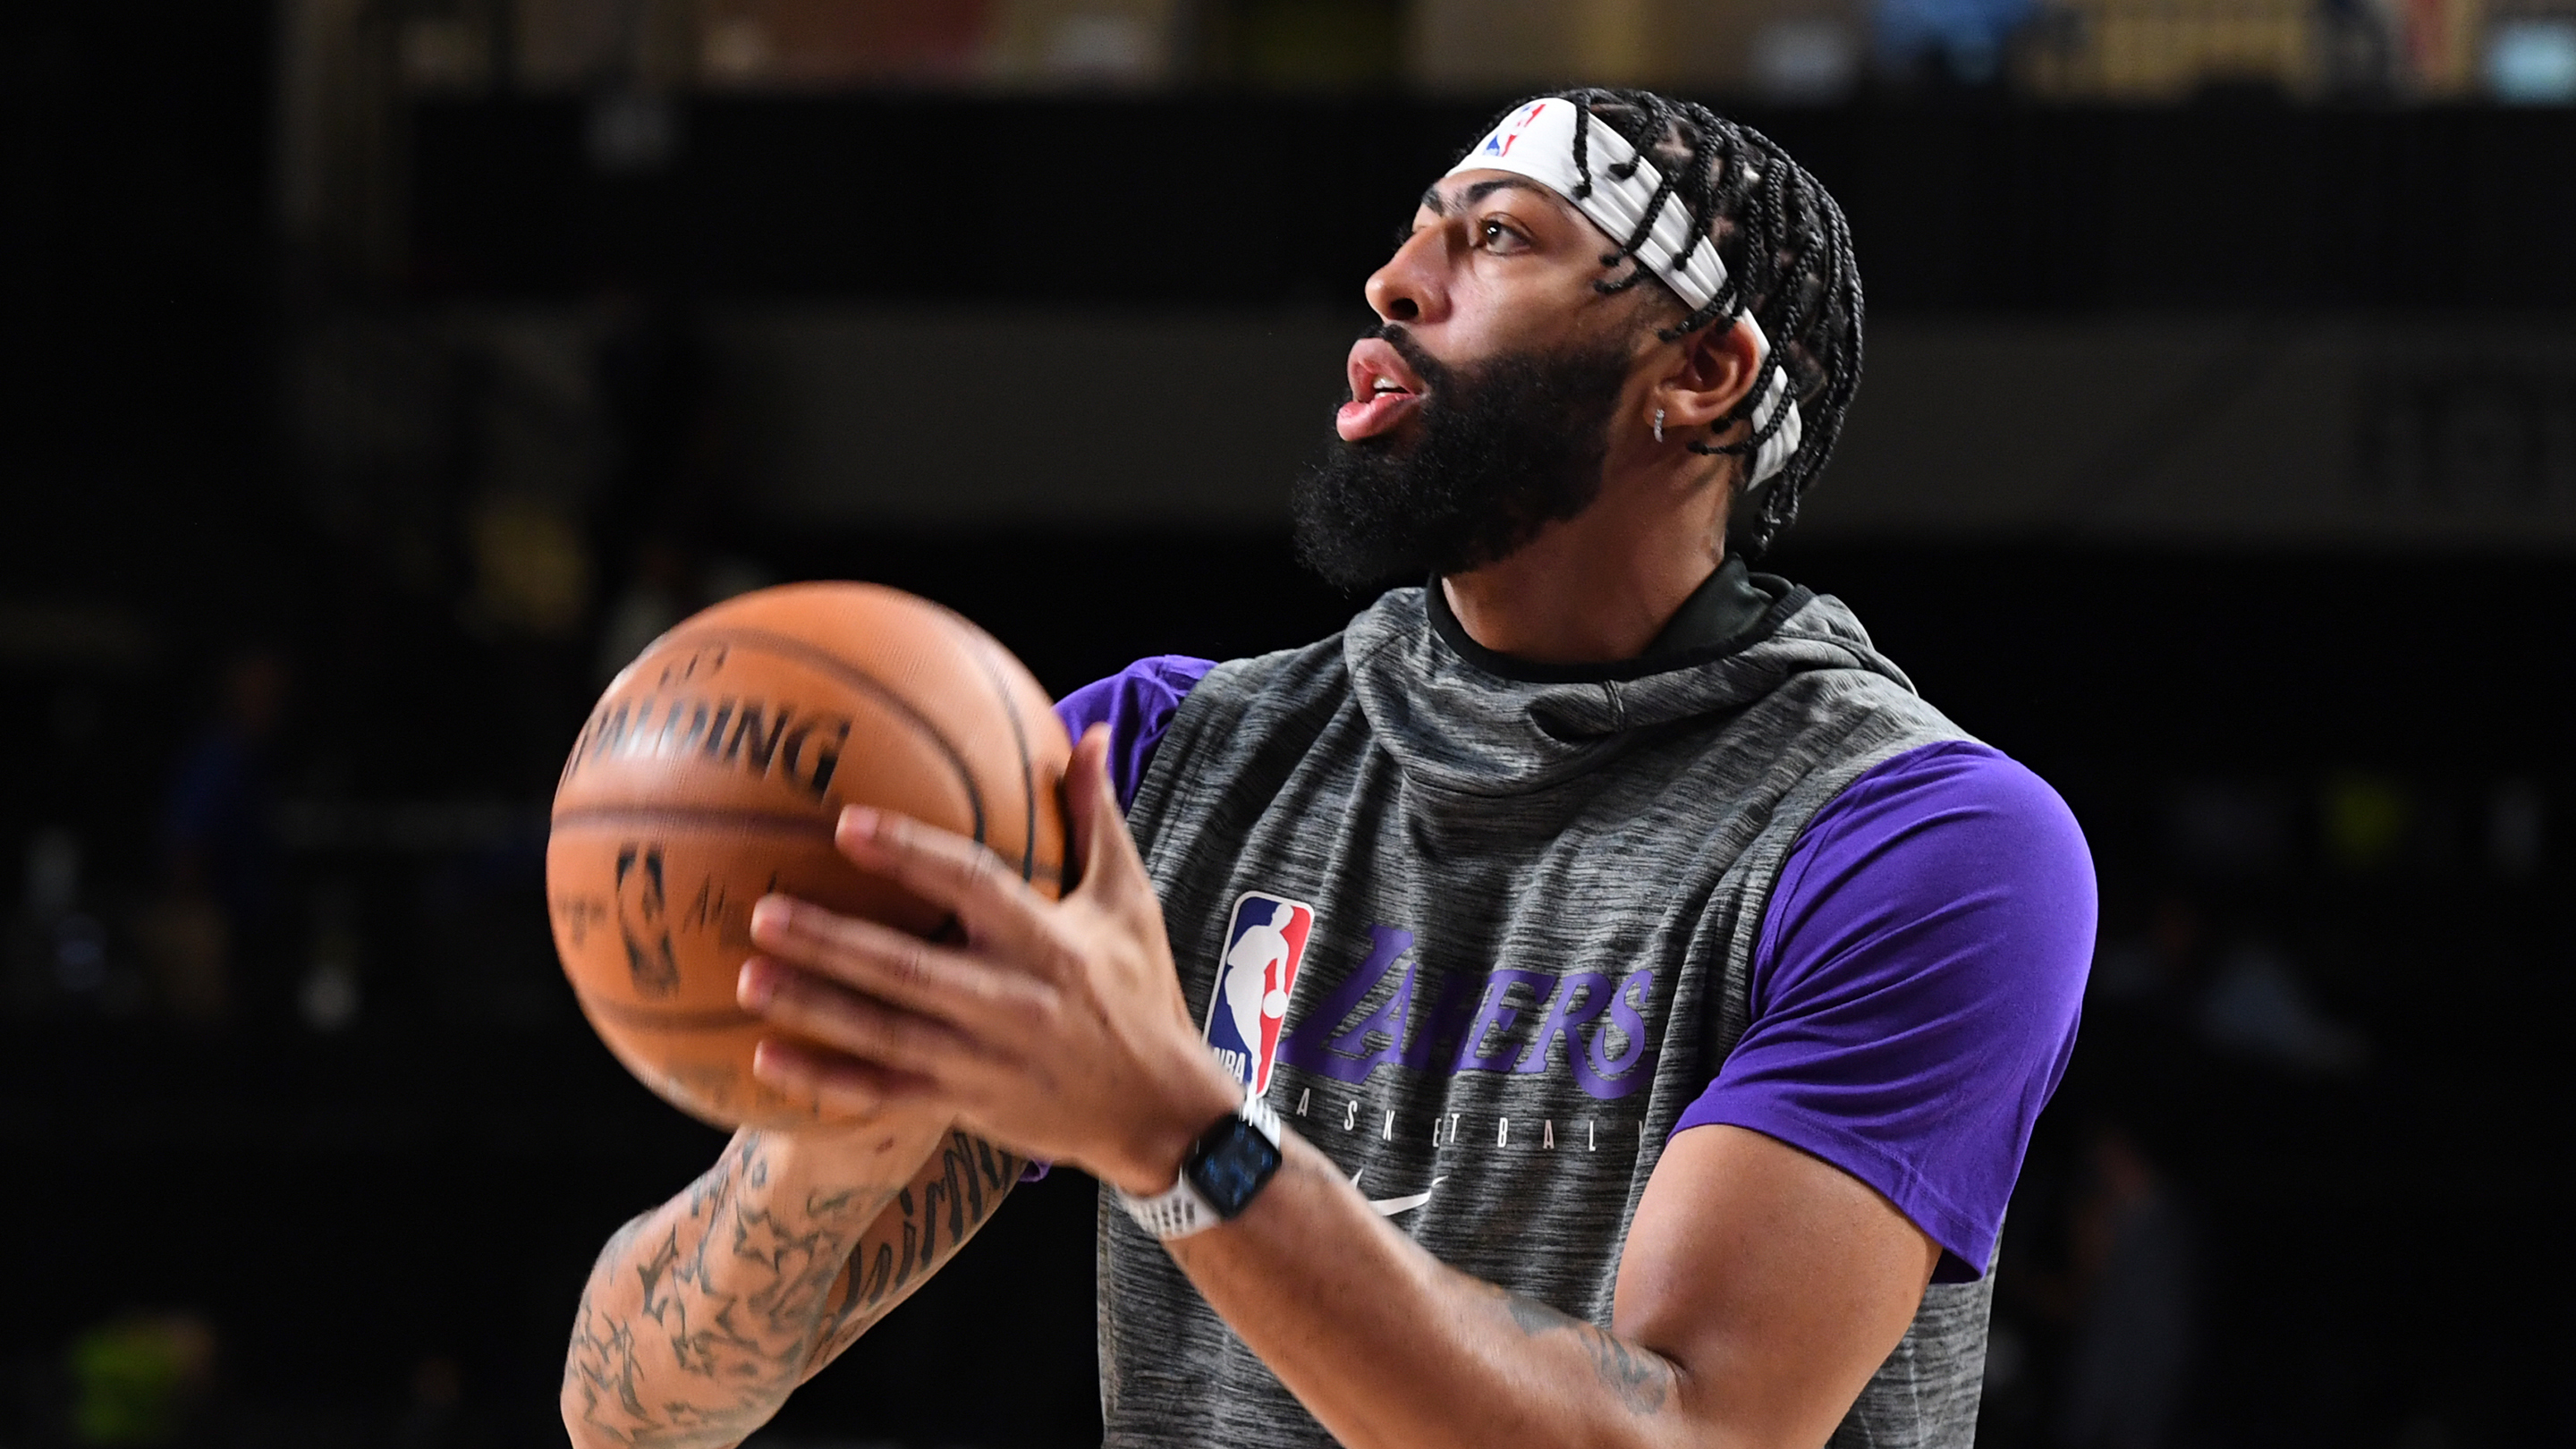 Watch Spotting Los Angeles Laker Anthony Davis Wearing An Apple Watch While Warming Up For Game 1 Of The NBA Finals